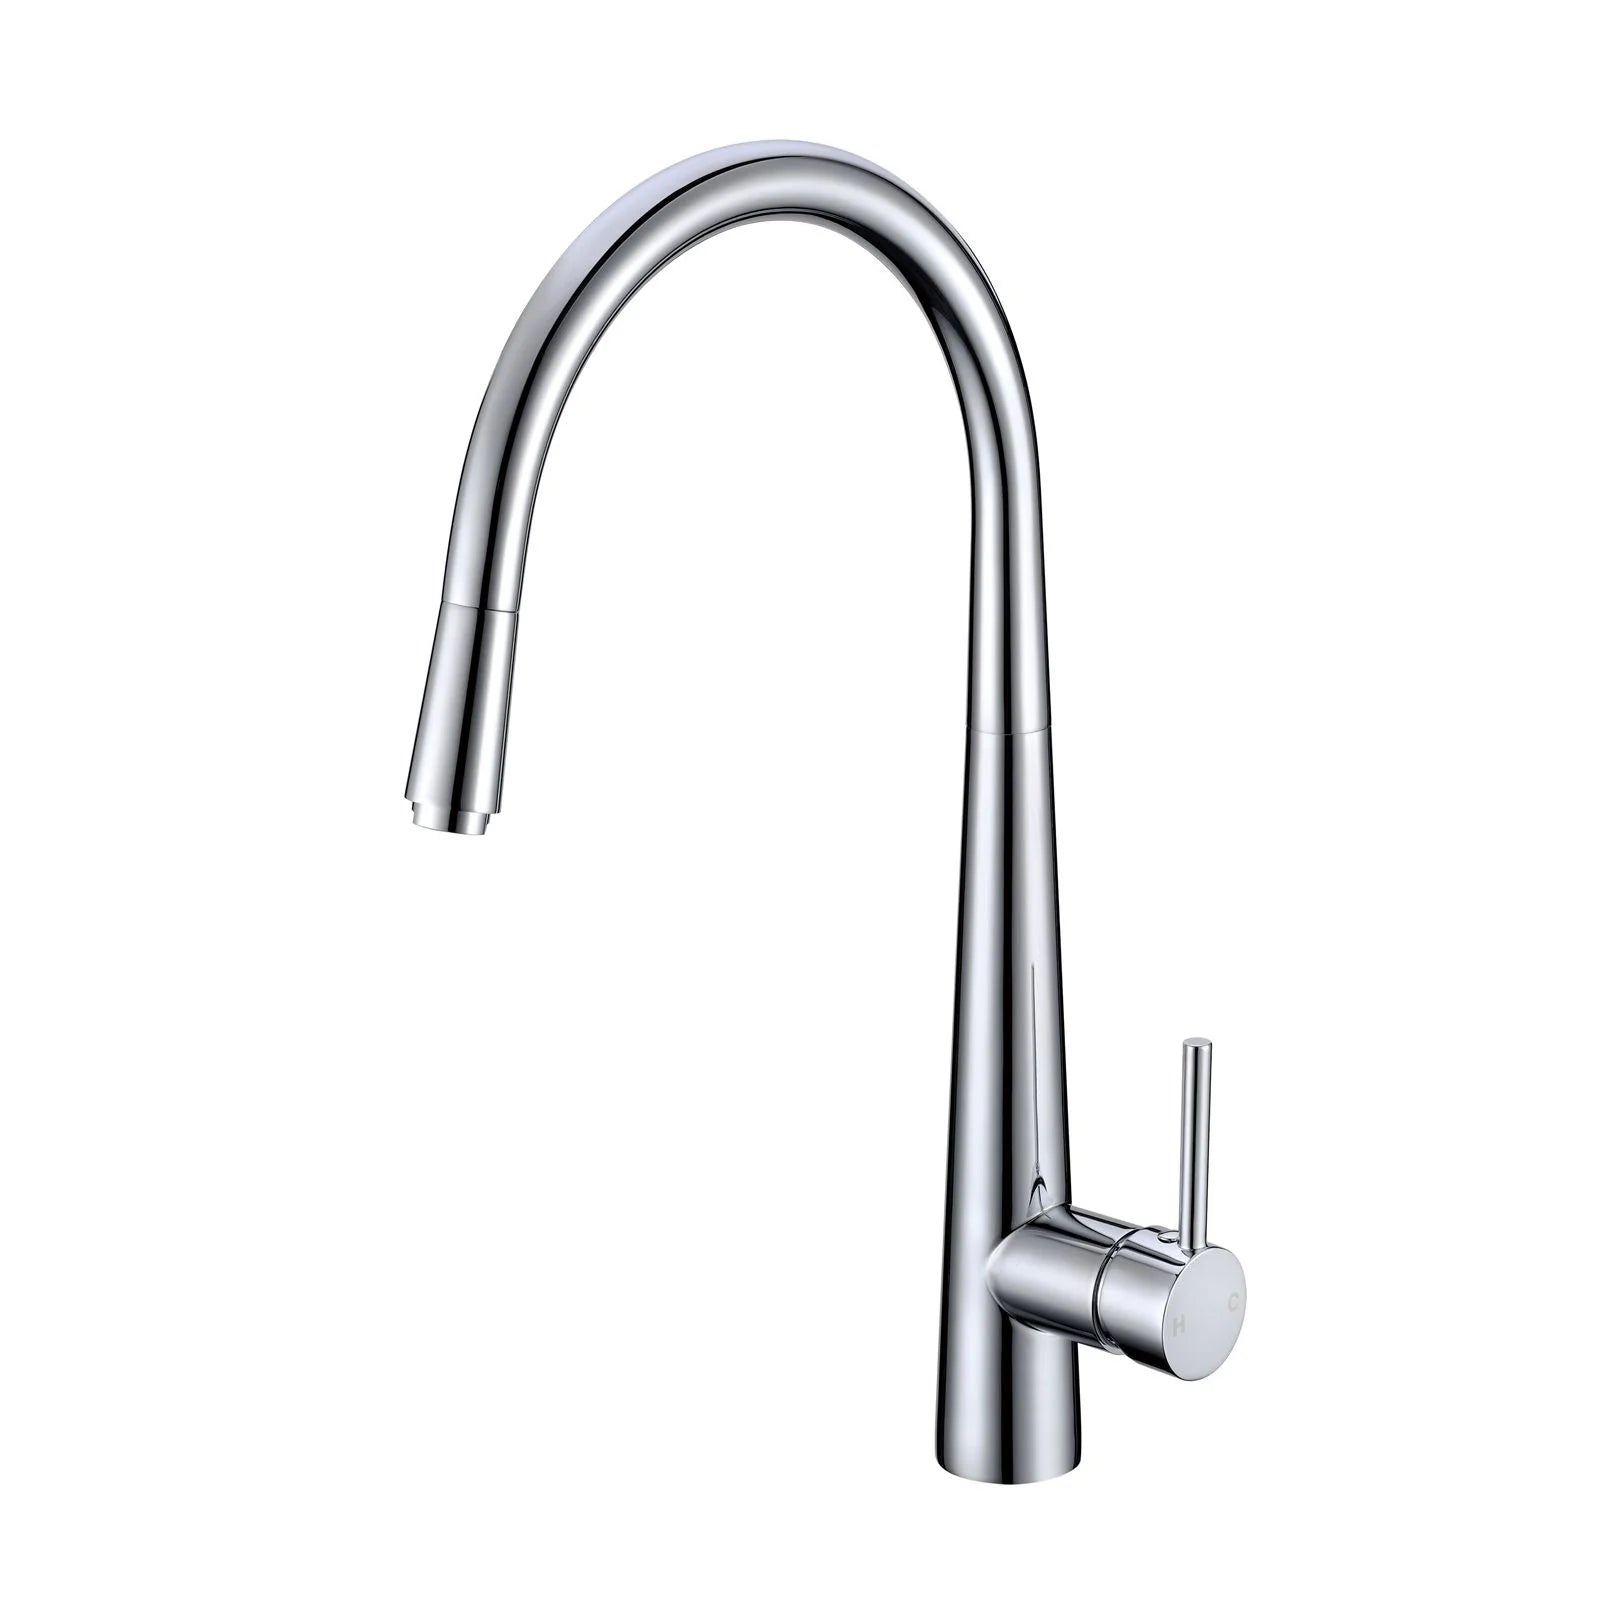 Round Pull Out Kitchen Sink Mixer Tap: Convenient and versatile addition to your kitchen-CH1021.KM